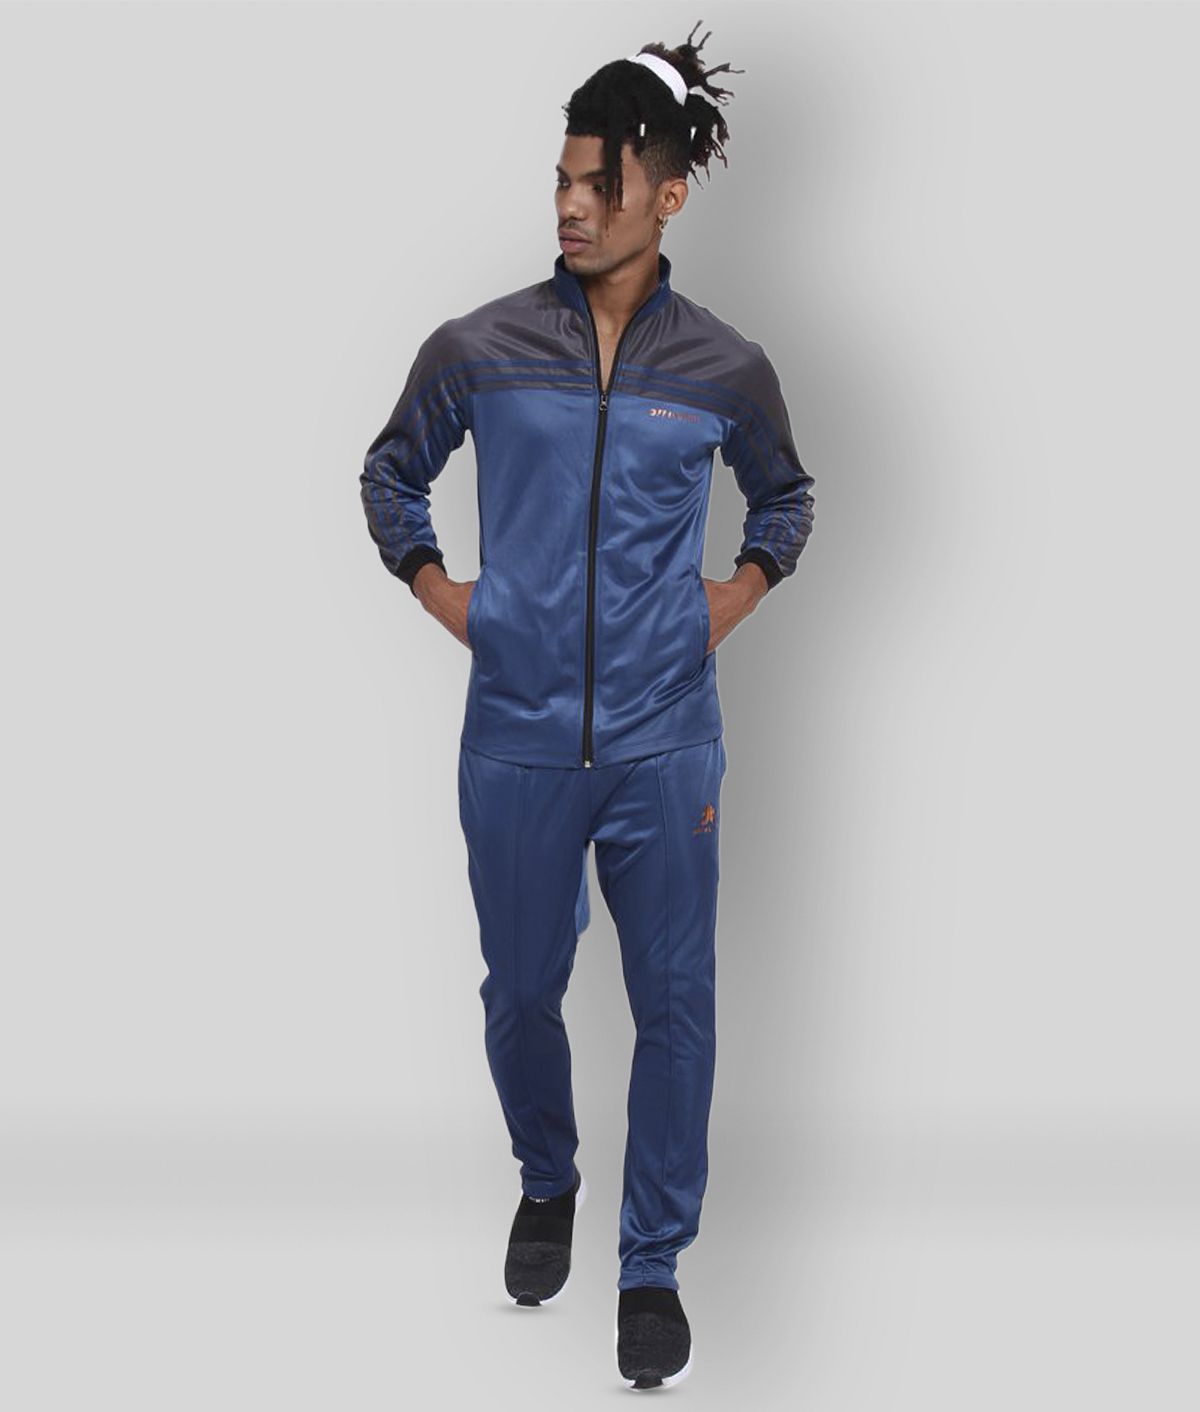     			OFF LIMITS - Blue Polyester Regular Fit Colorblock Men's Sports Tracksuit ( Pack of 1 )